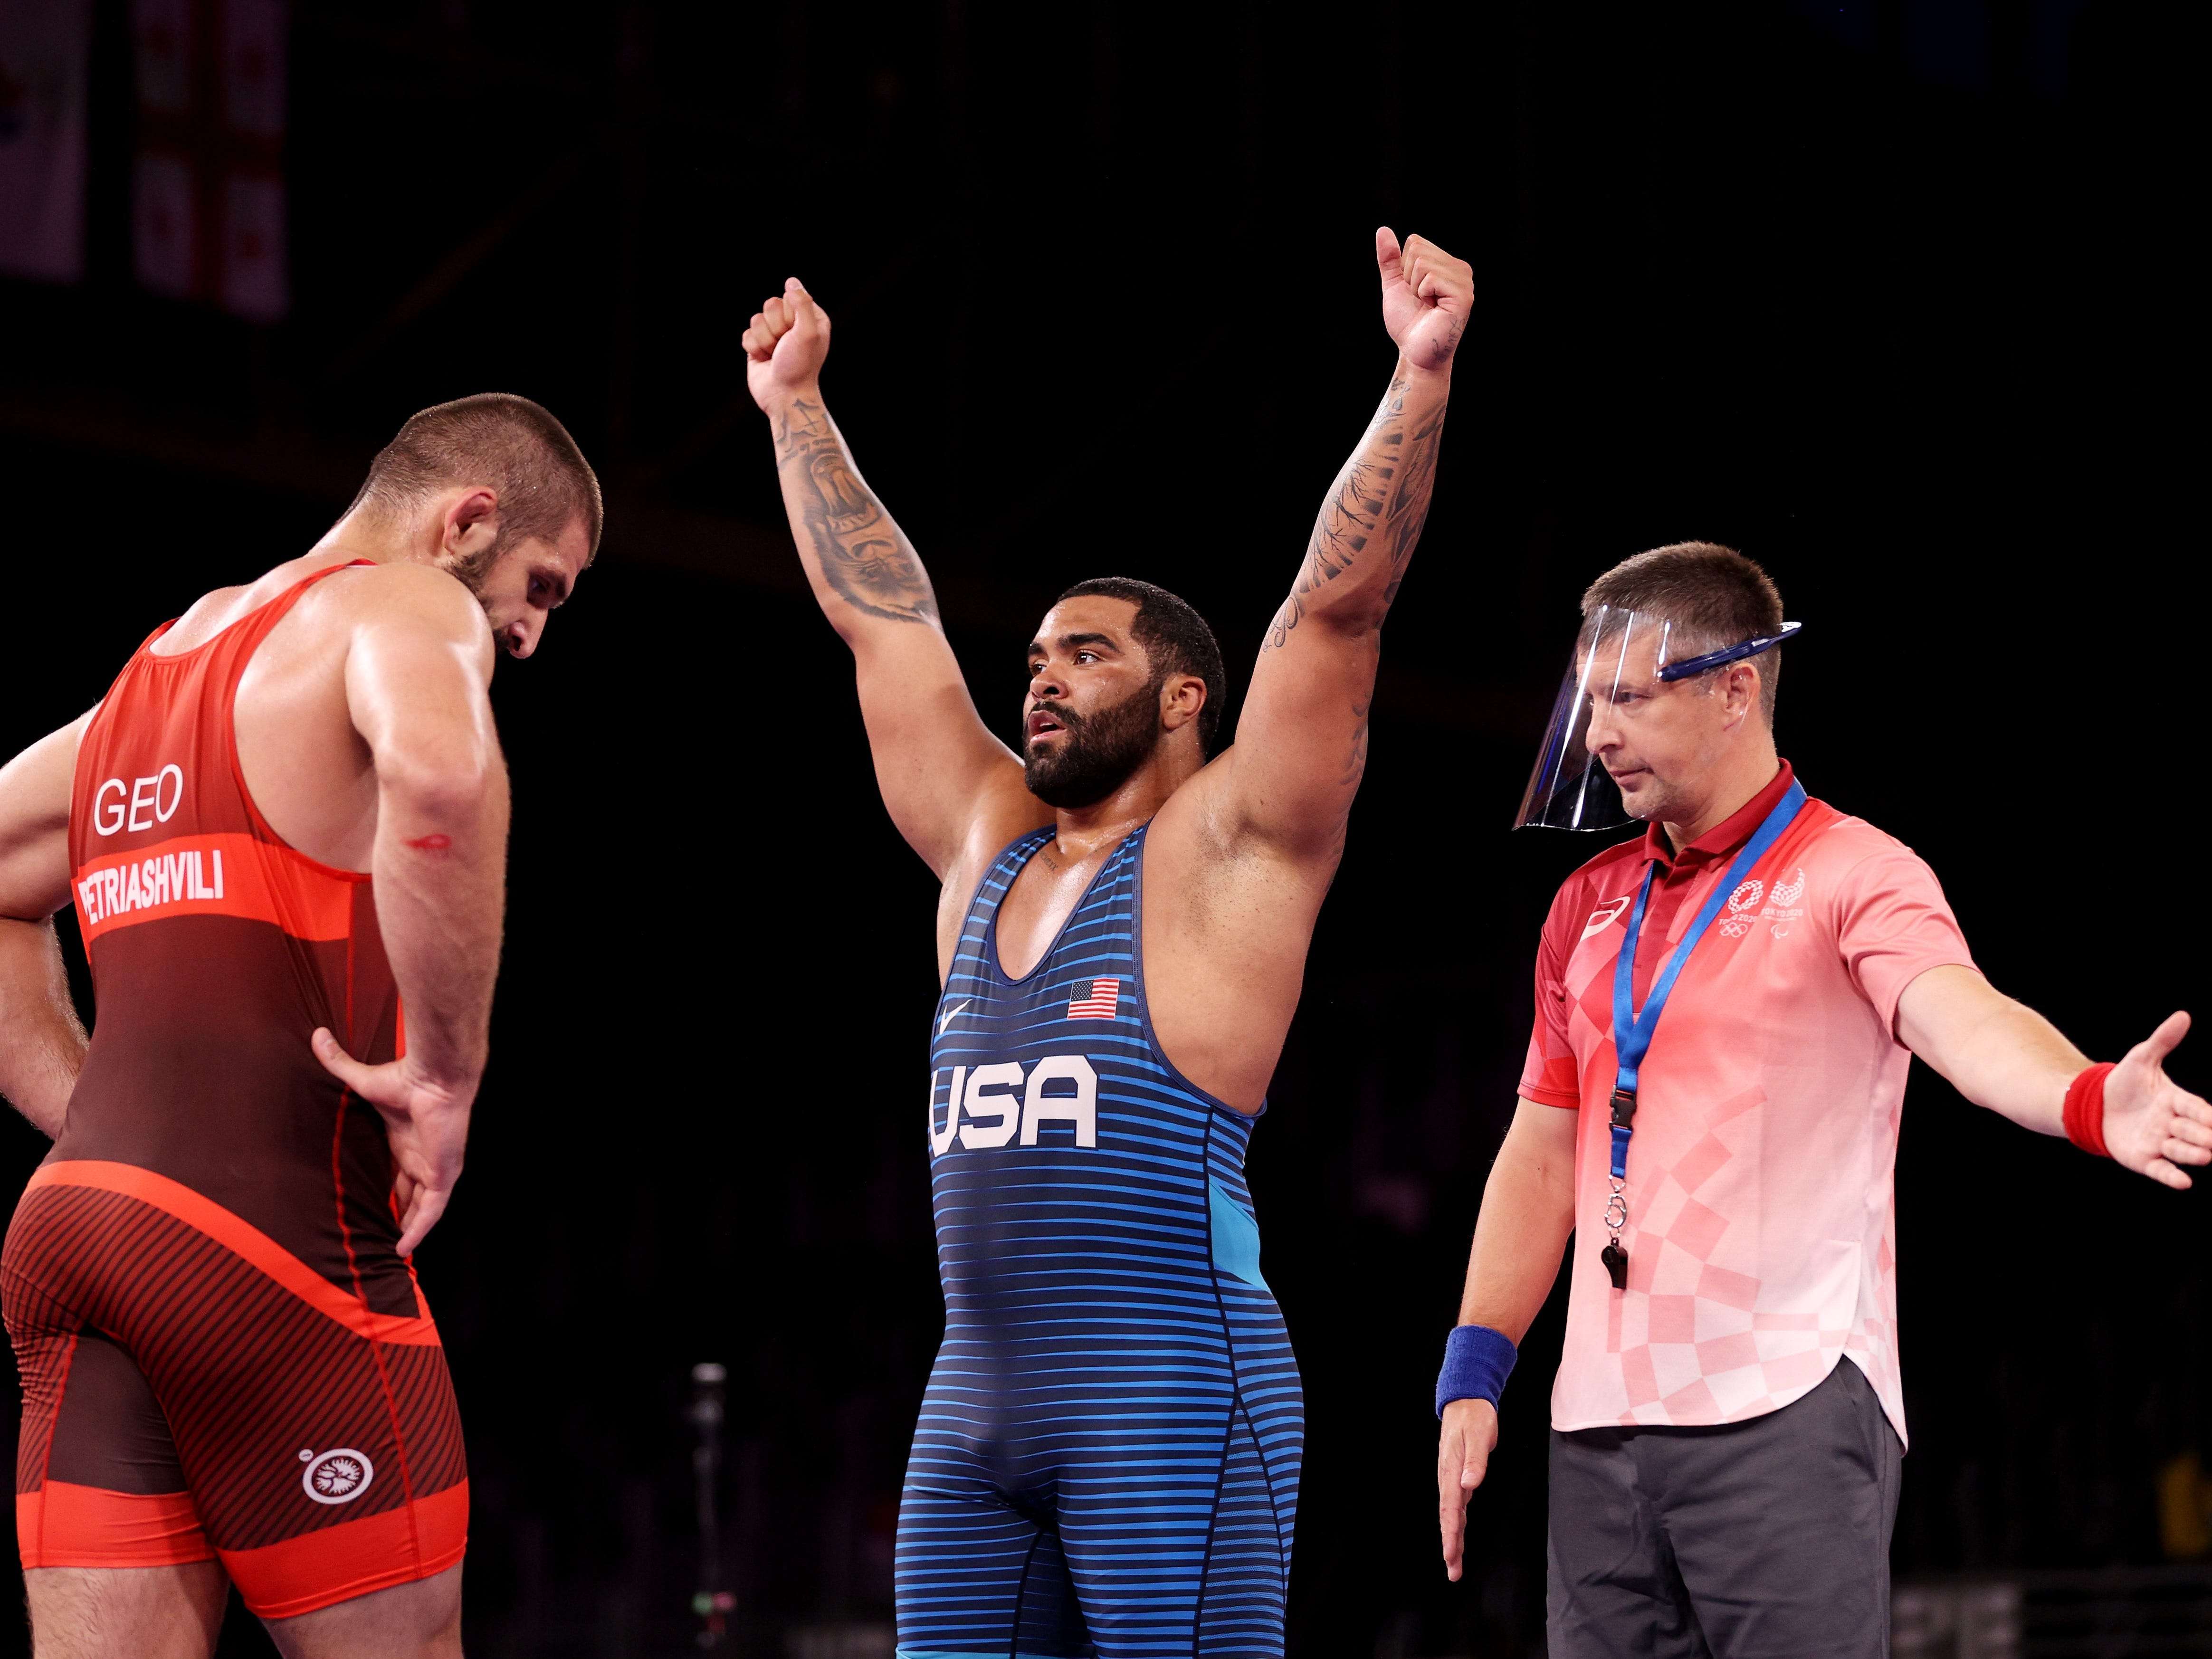 A US wrestling heavyweight pulled off a lastsecond miracle to win gold